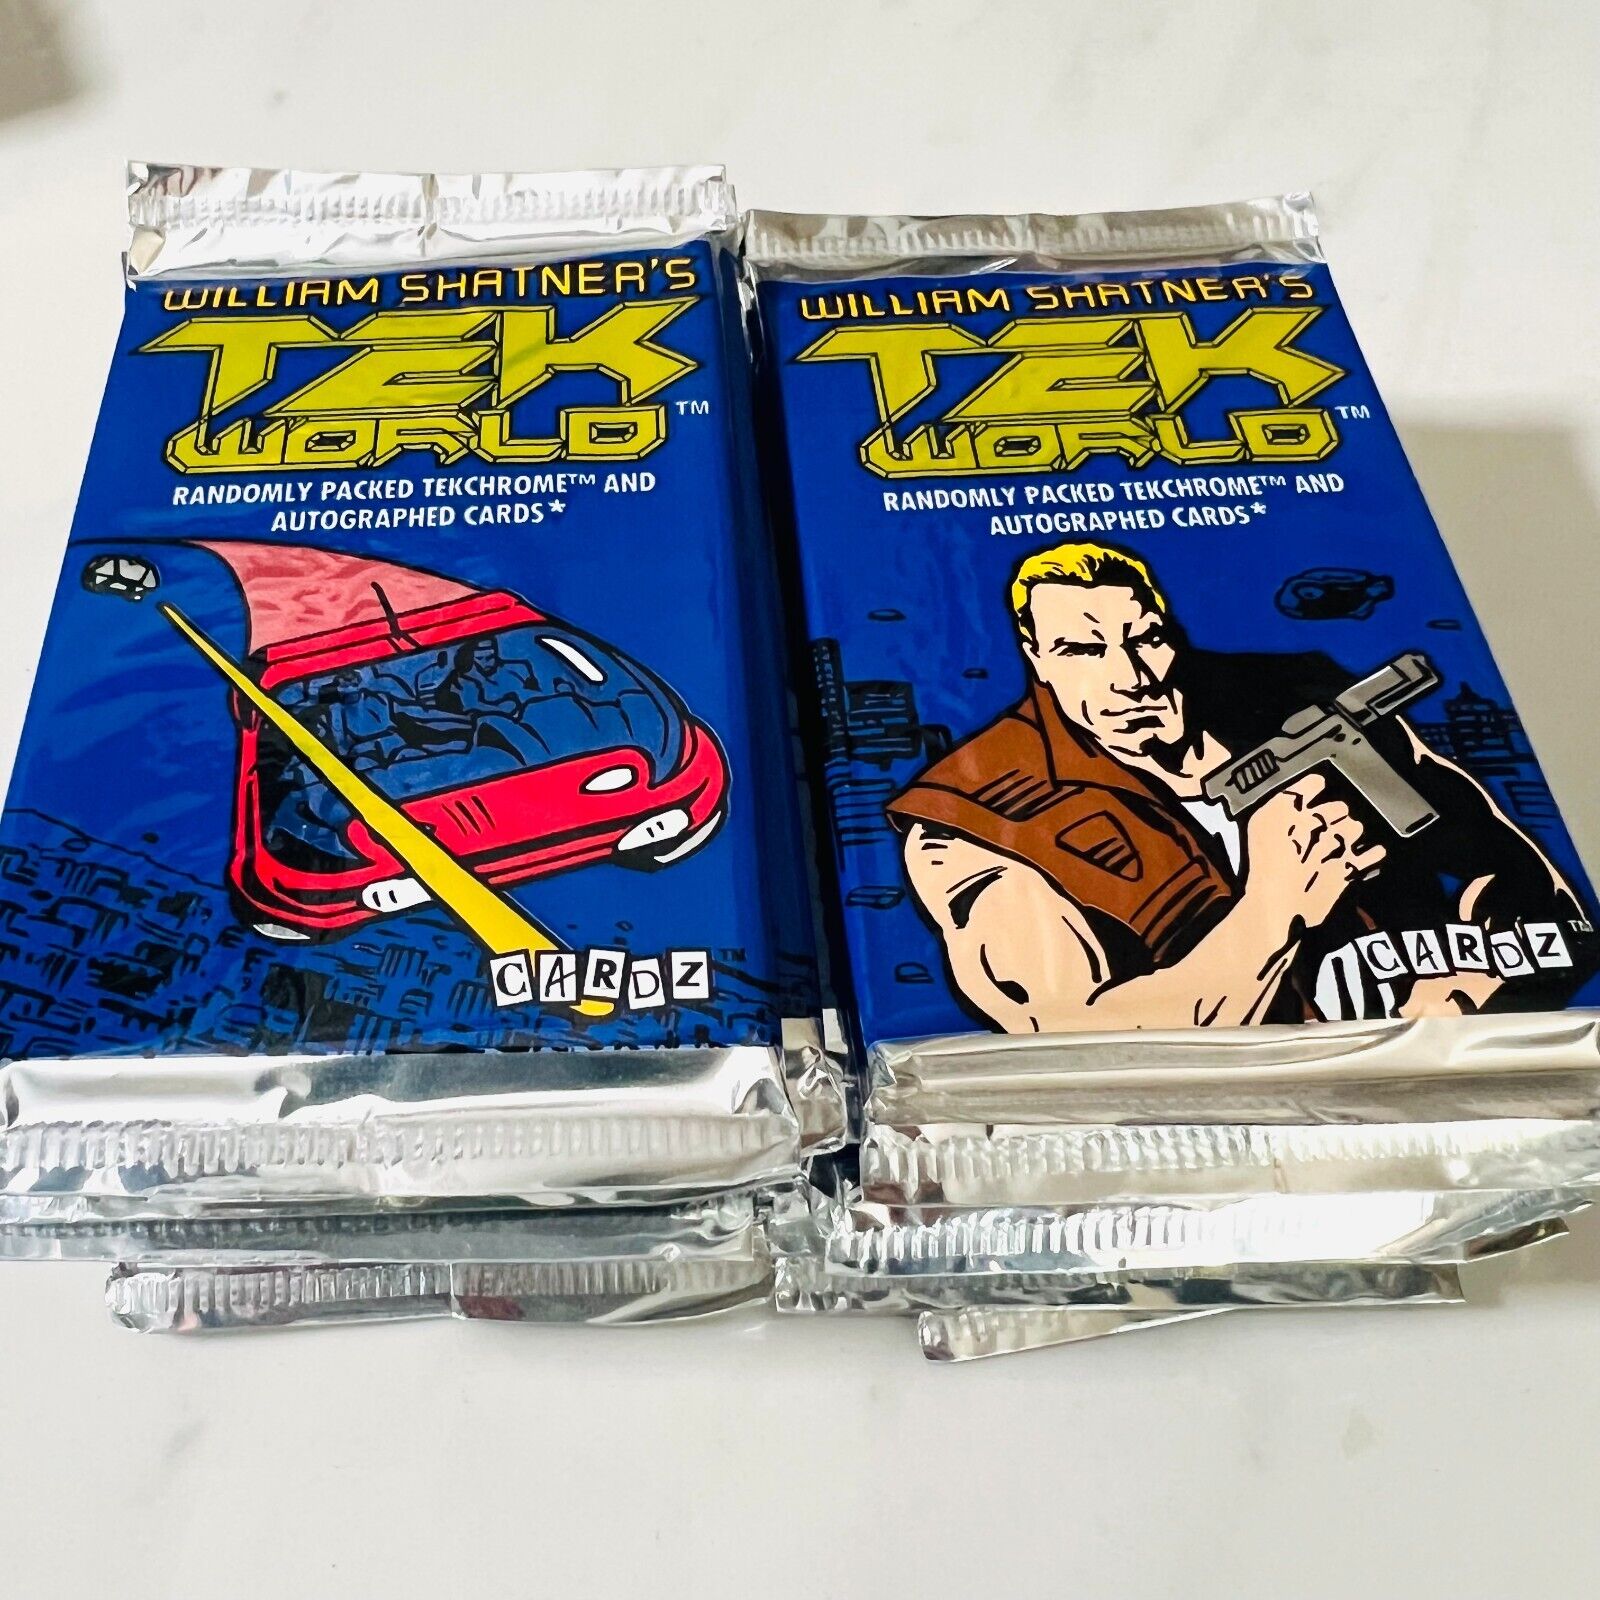 Lot of 28 PACKS -William Shatner\'s TEK WORLD 1993 Collectable TRADING CARDS Pack